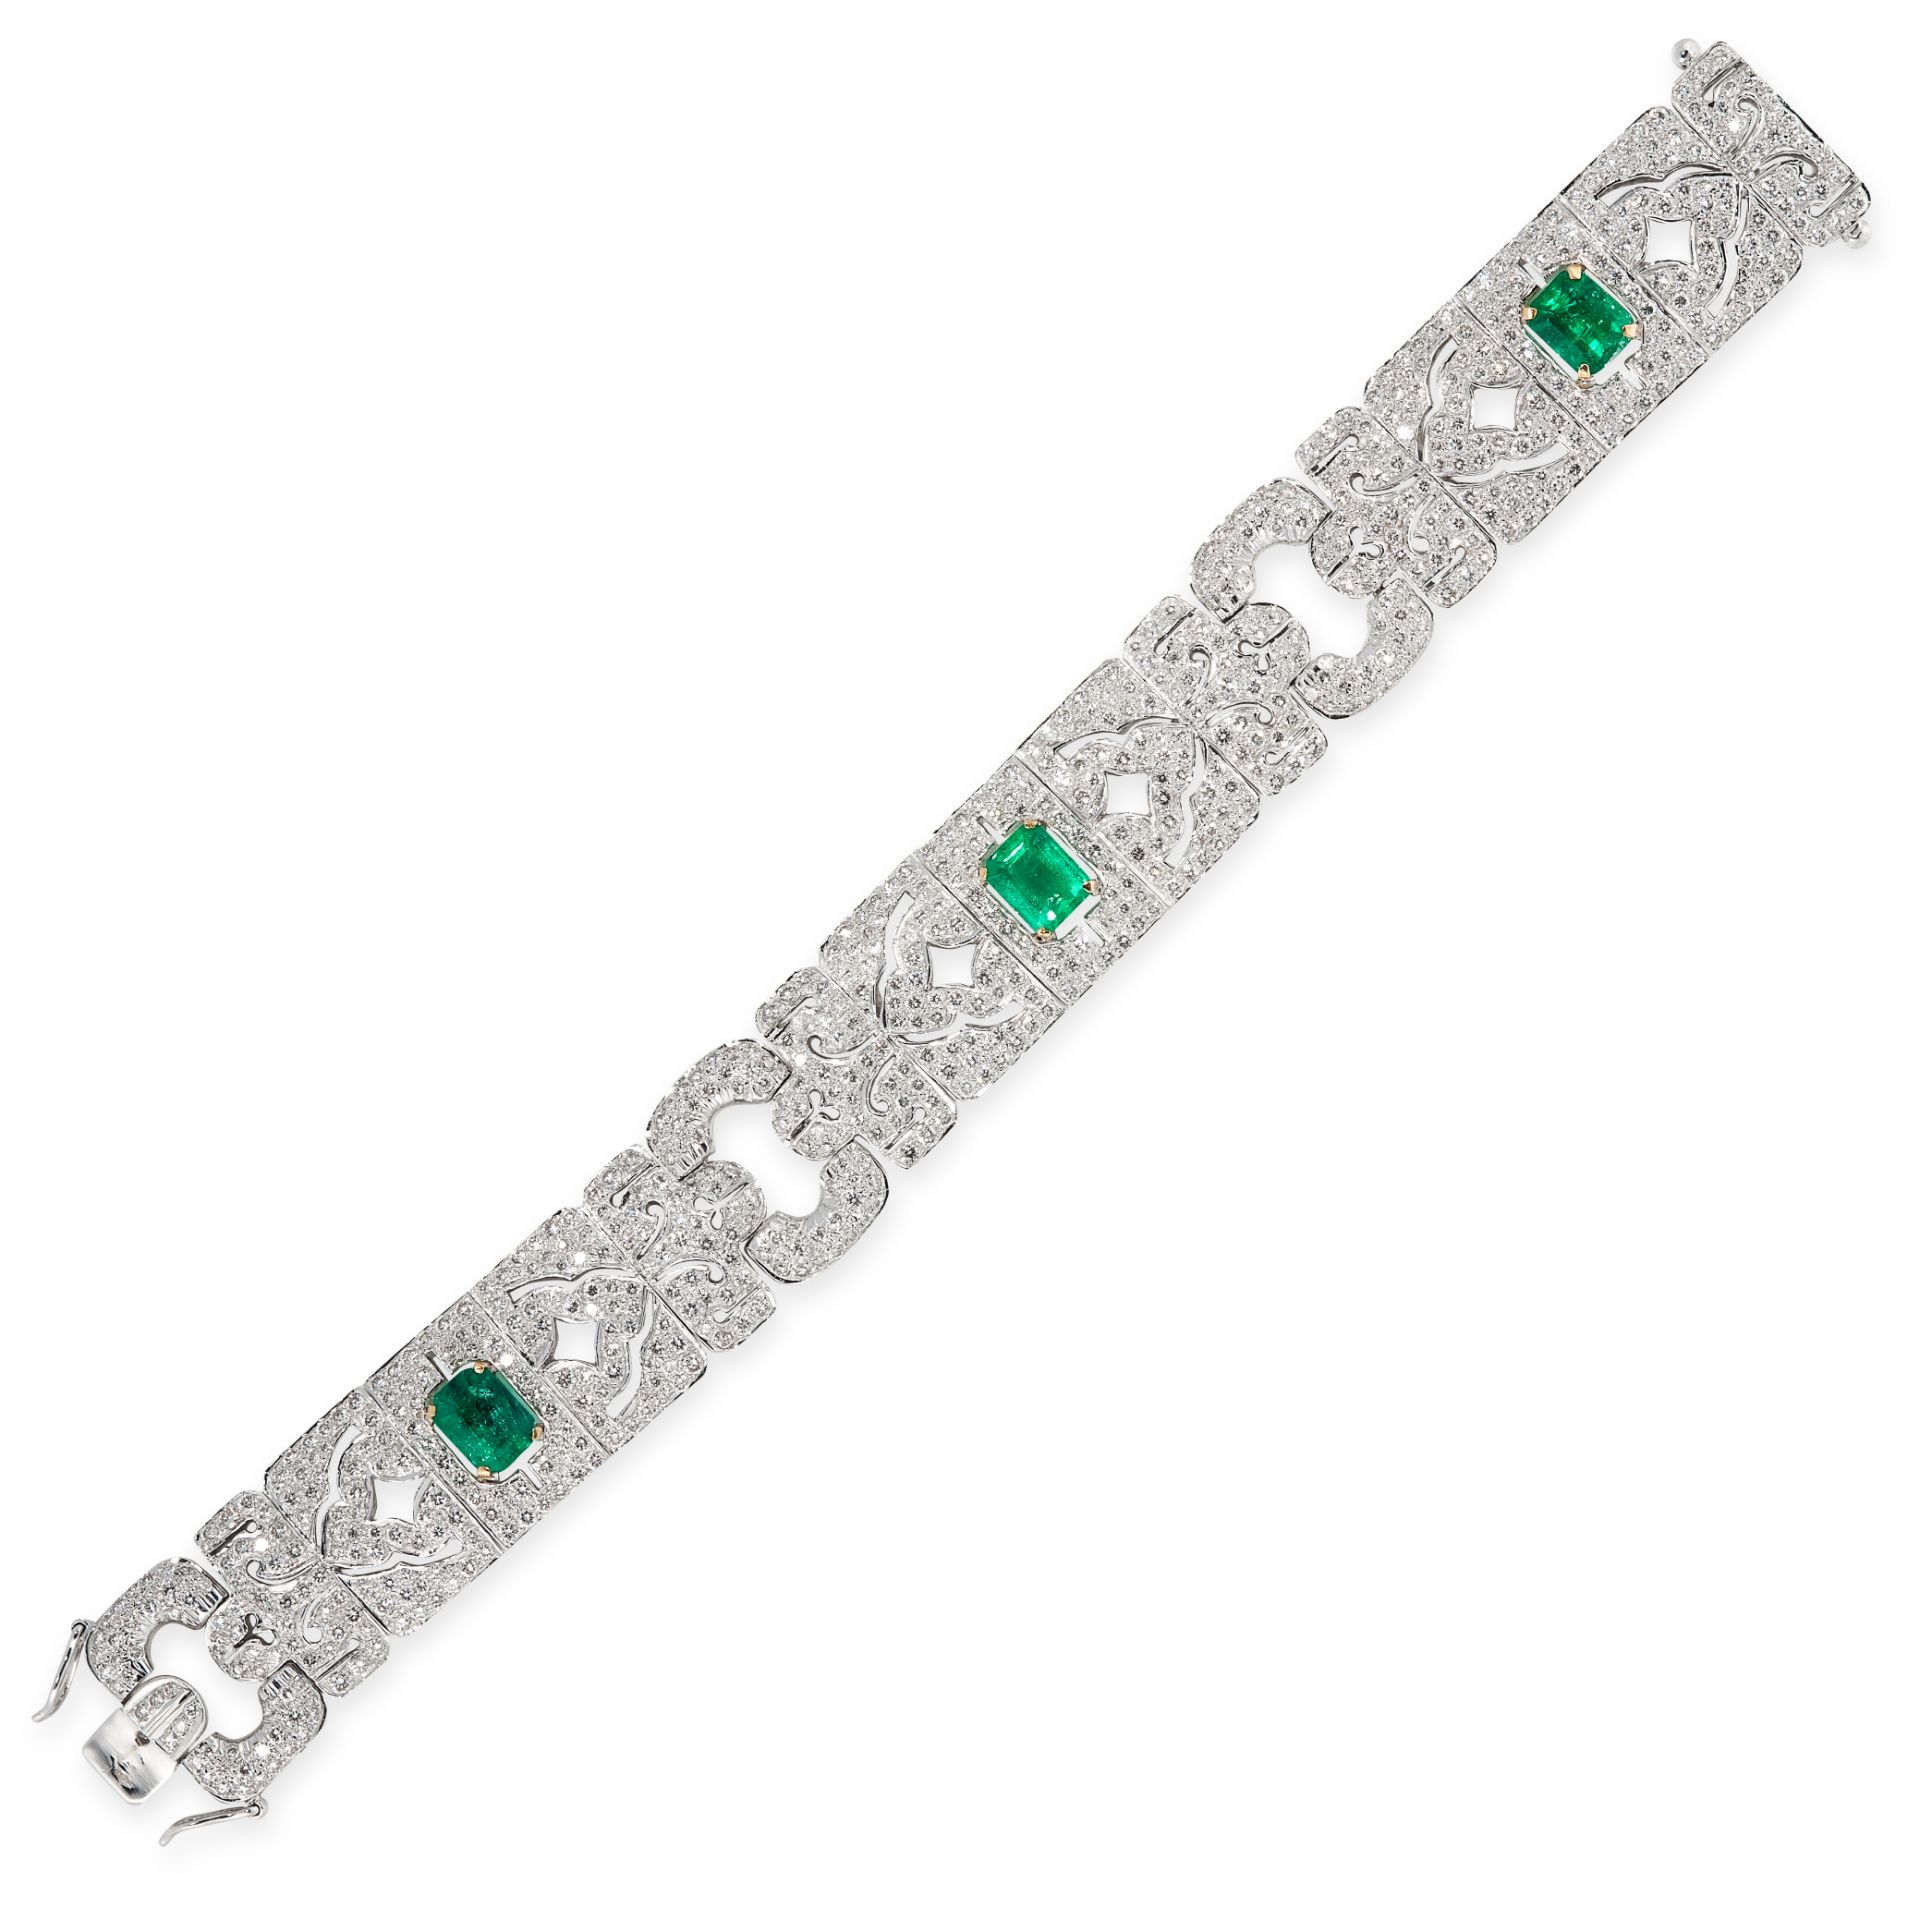 AN EMERALD AND DIAMOND BRACELET in 18ct white gold, set with a trio of emerald cut emeralds of 1.65,